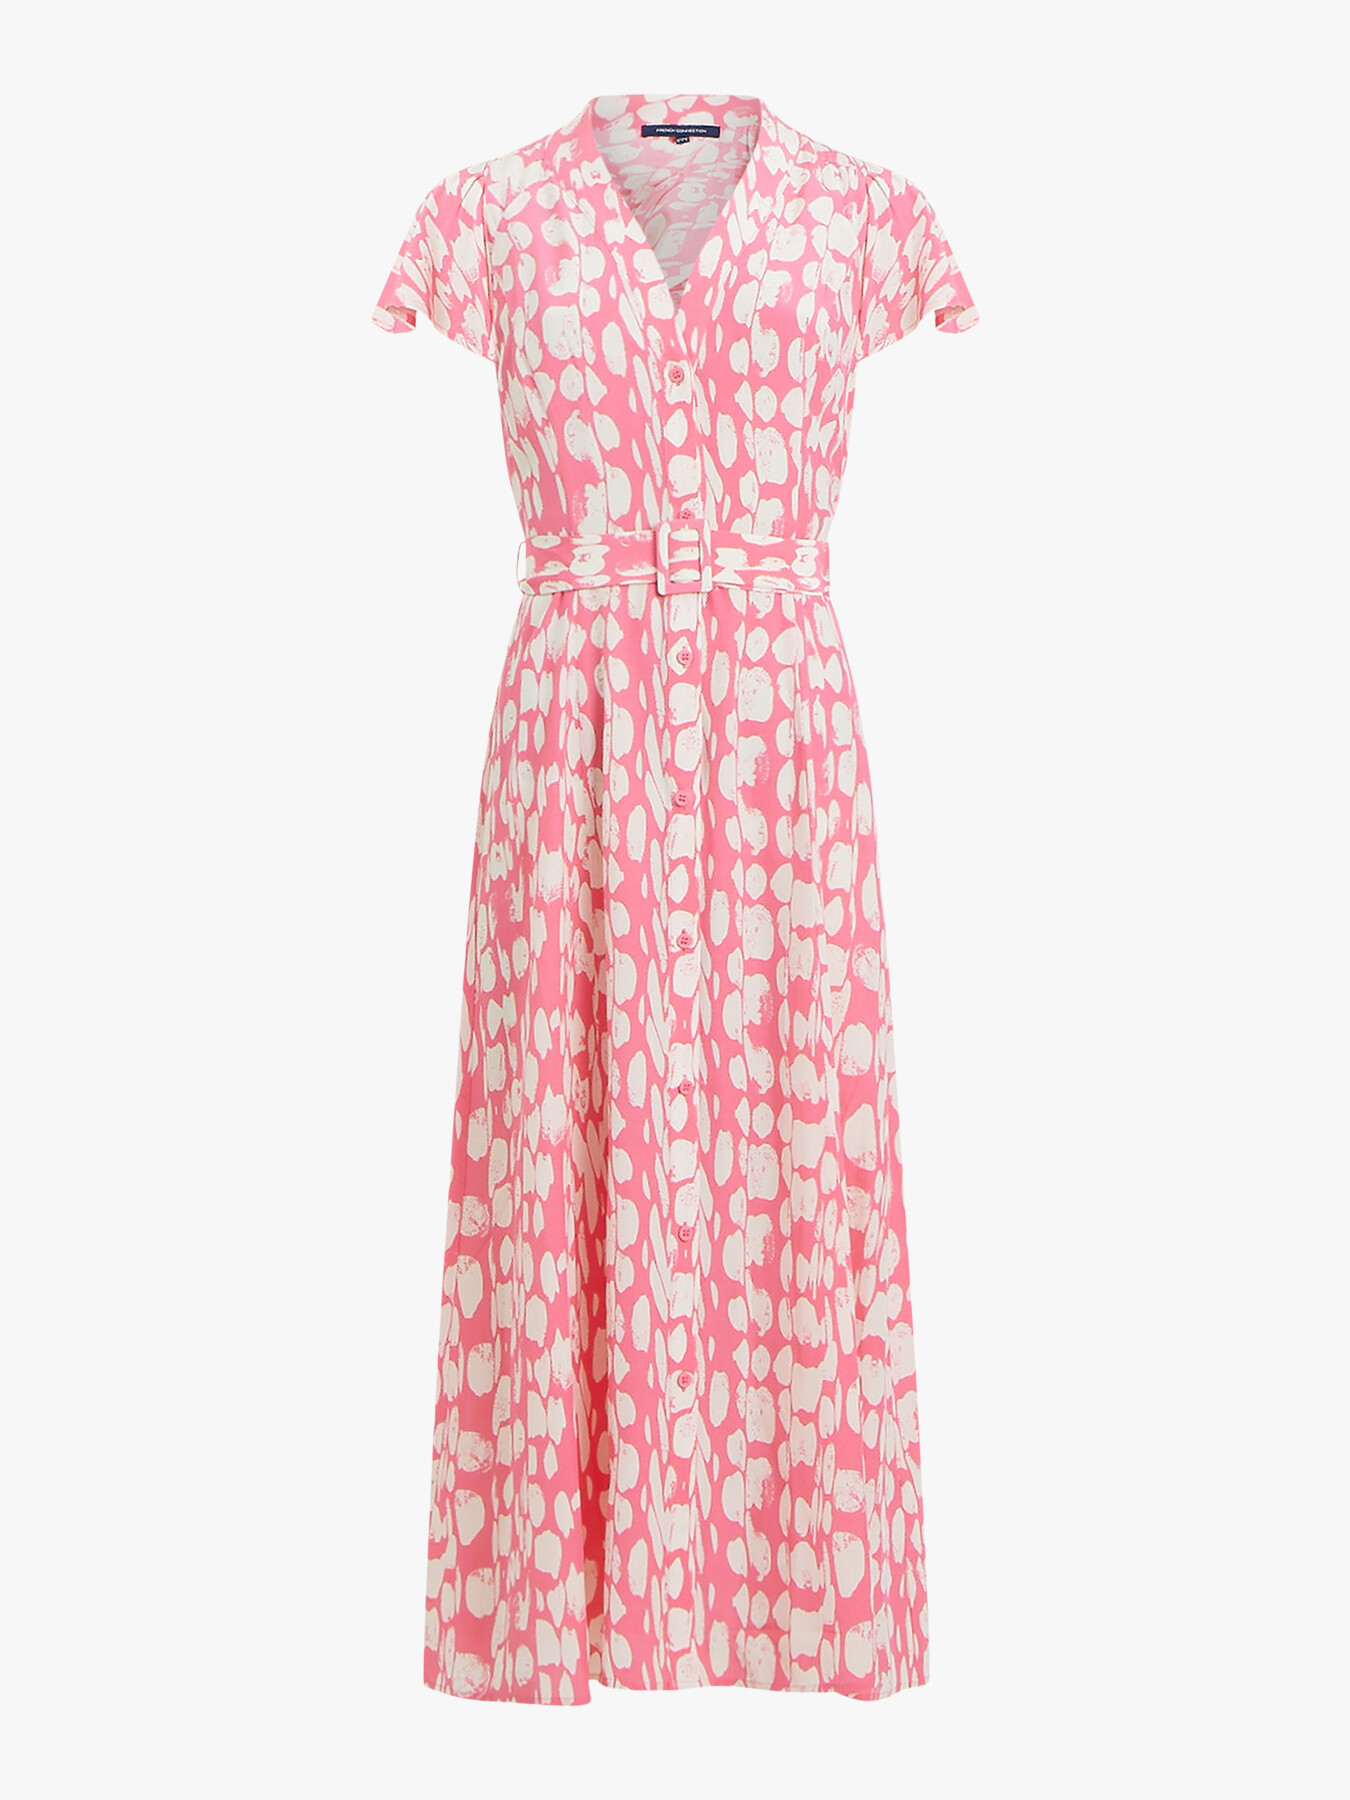 French Connection Islanna Crepe Printed Dress | Day | Fenwick